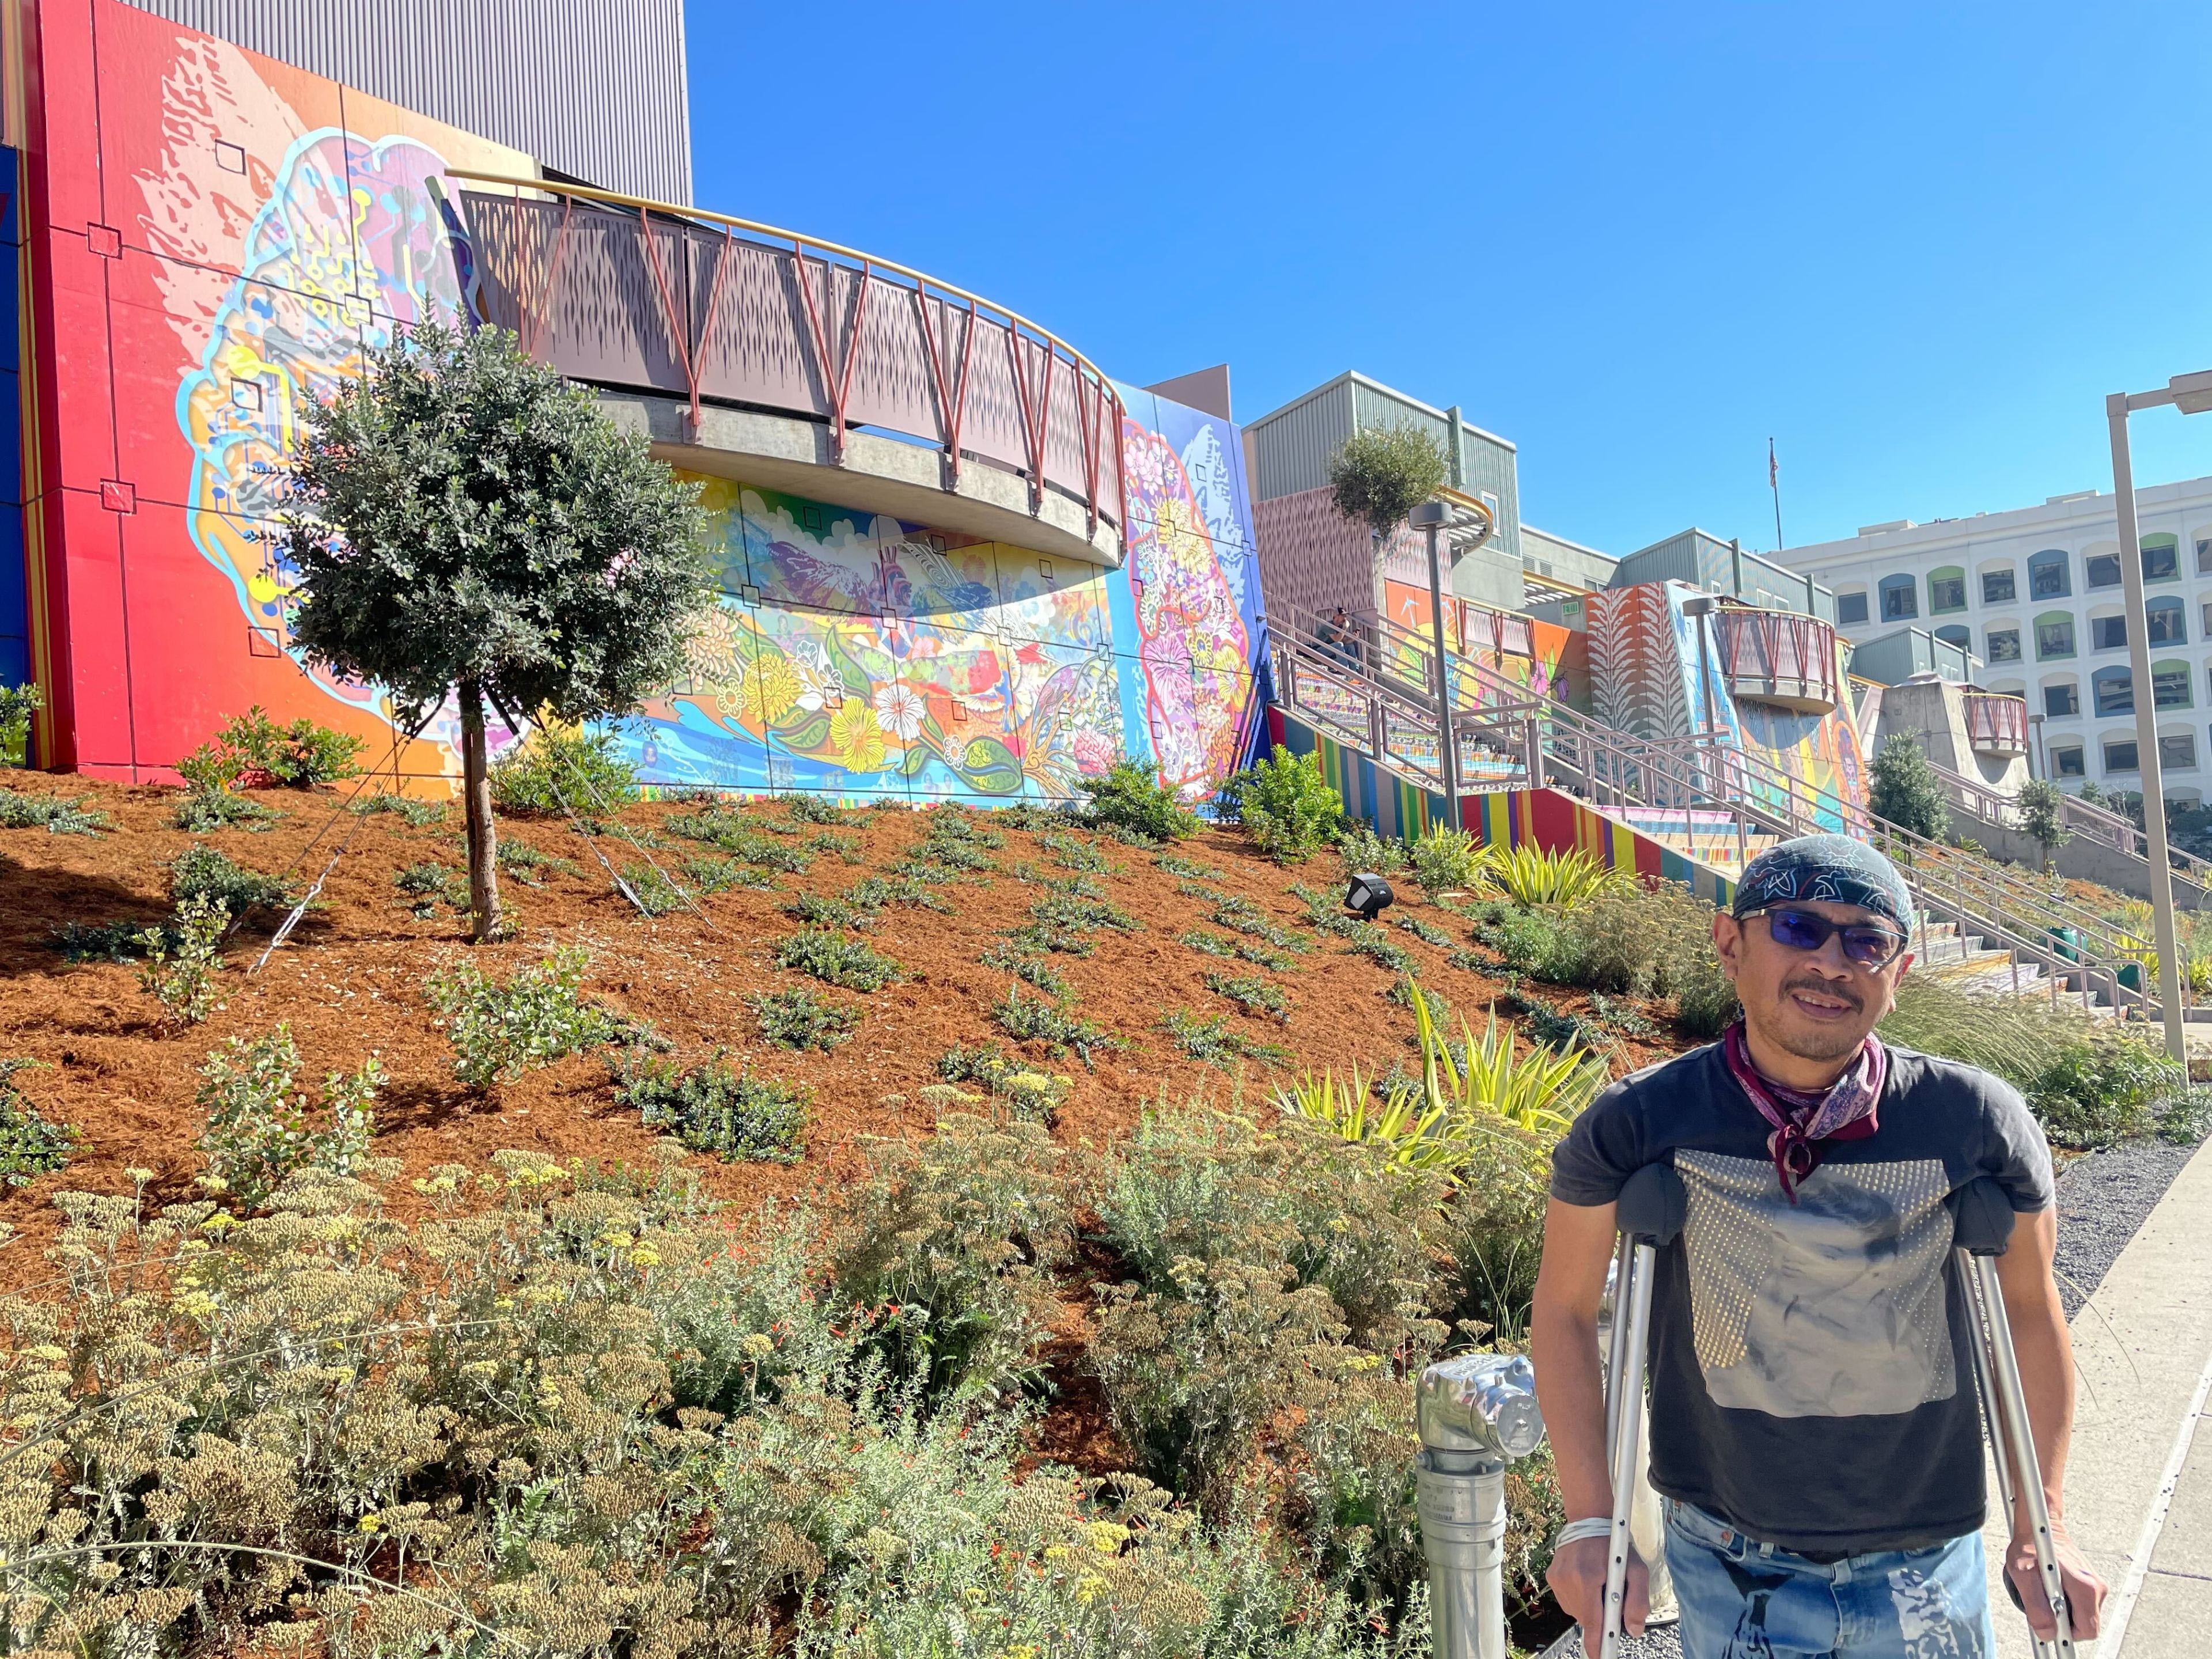 Artist Mel Vera Cruz, wearing a t-shirt, bandana and standing with crutches, stands in front of a bank covered in woodchips with low-lying scrubs planted sparsely throughout. Behind him is a mural Vera Cruz designed, depicting a stylized human brain.